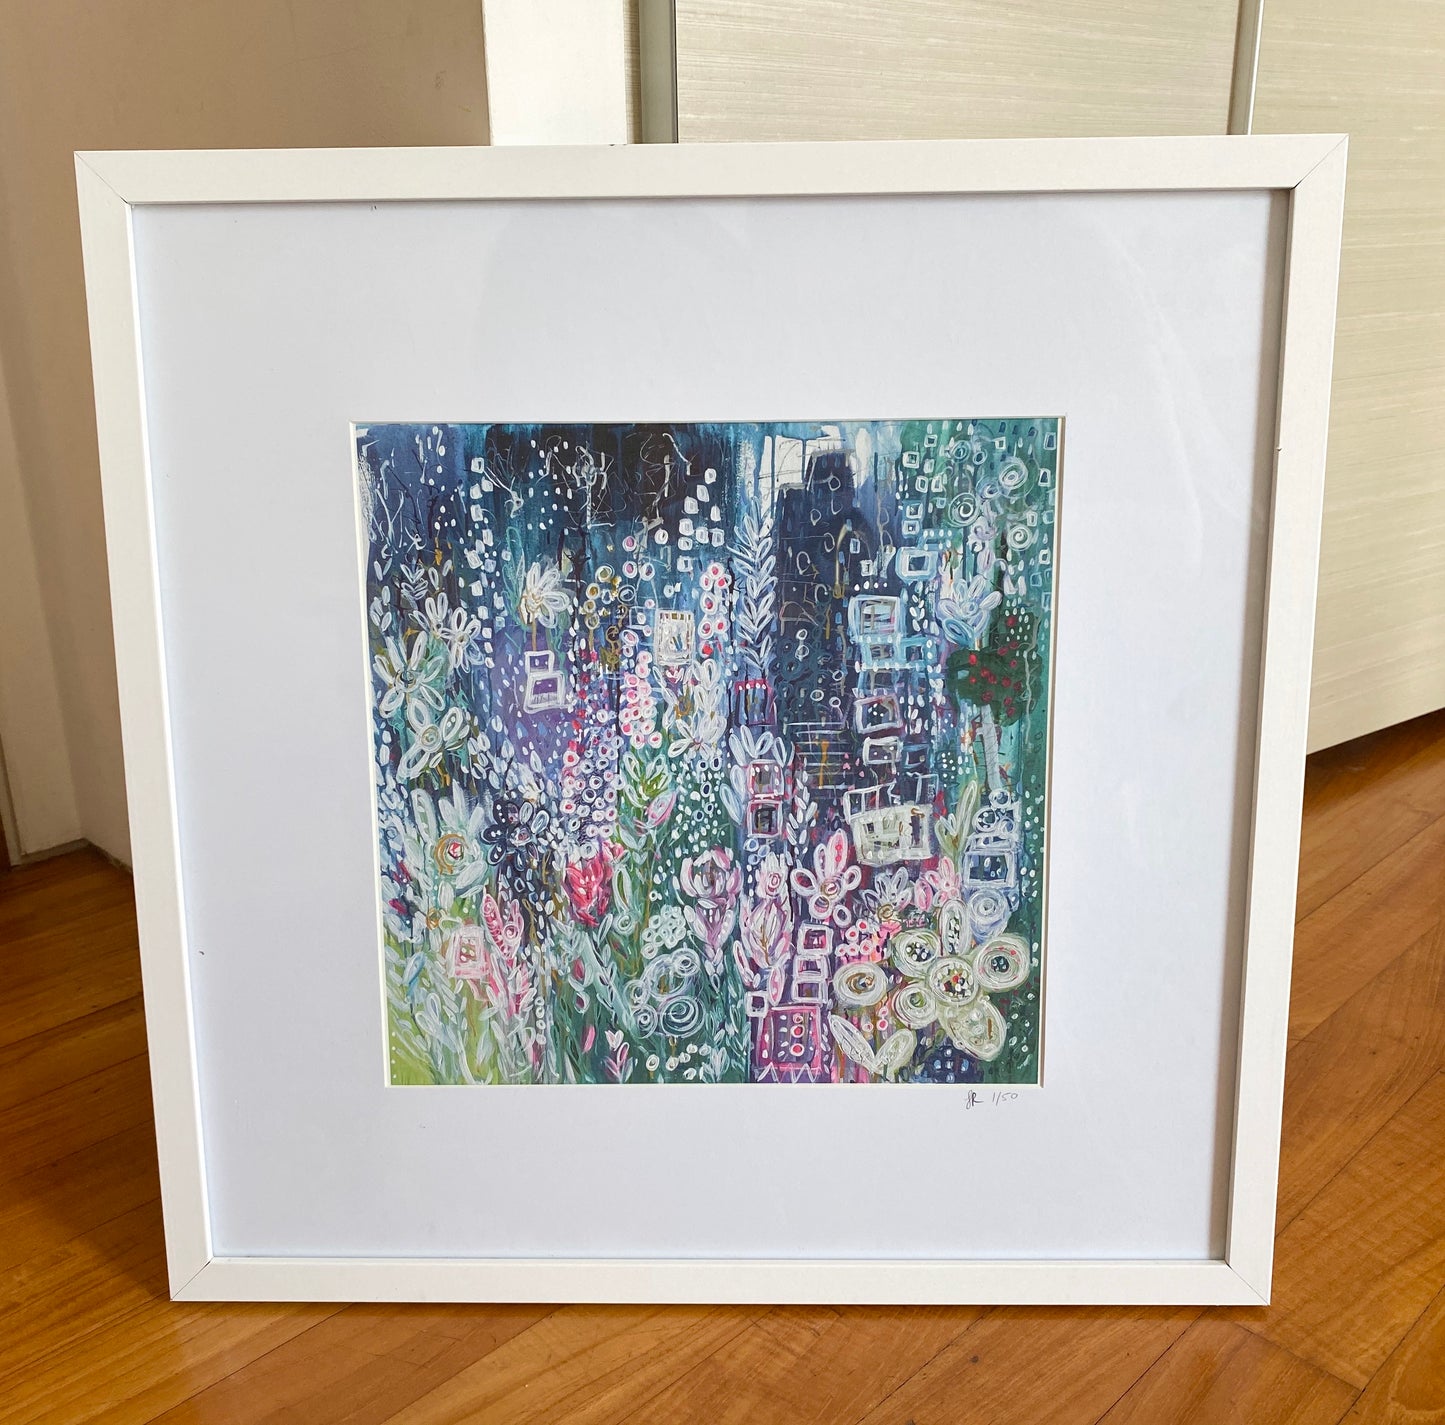 Urban Garden 1st edition limited edition framed fine art print. Collection only.